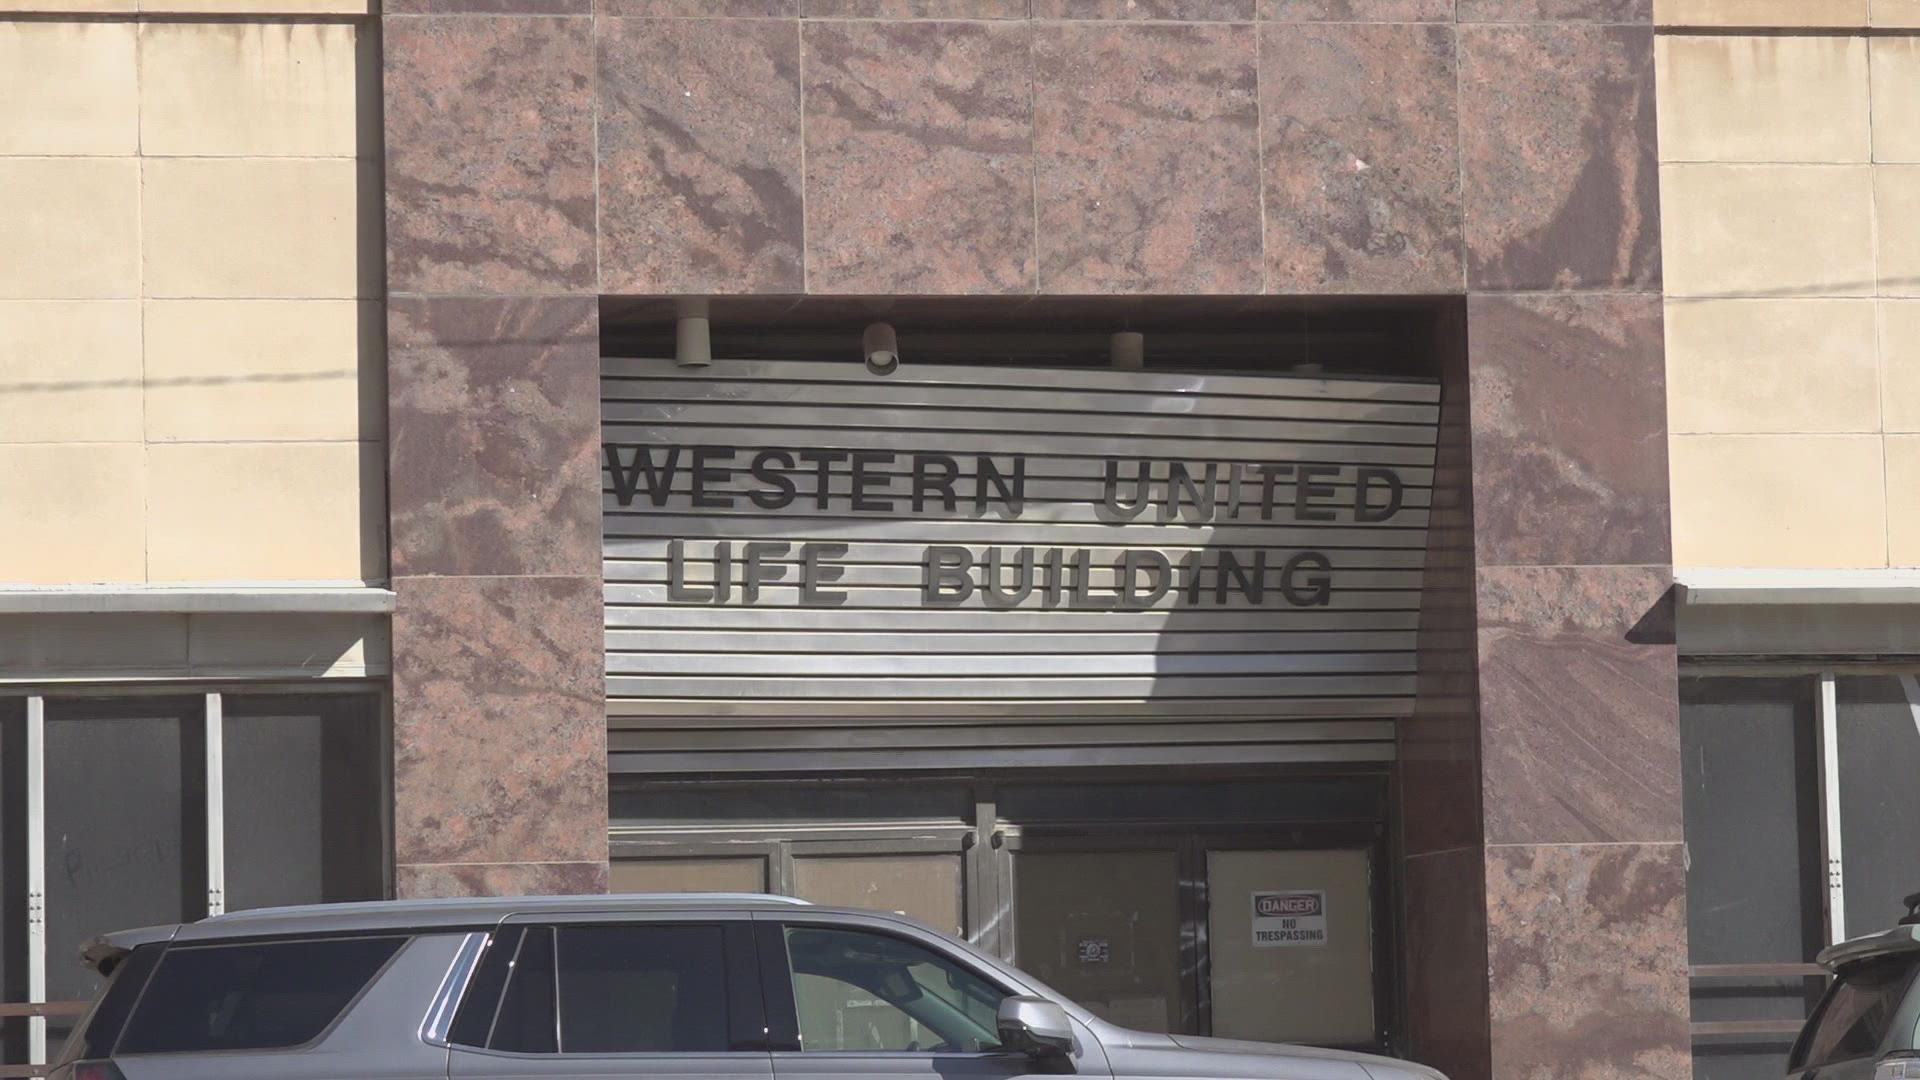 The Western United Life Building in Downtown Midland to be demolished early next year.